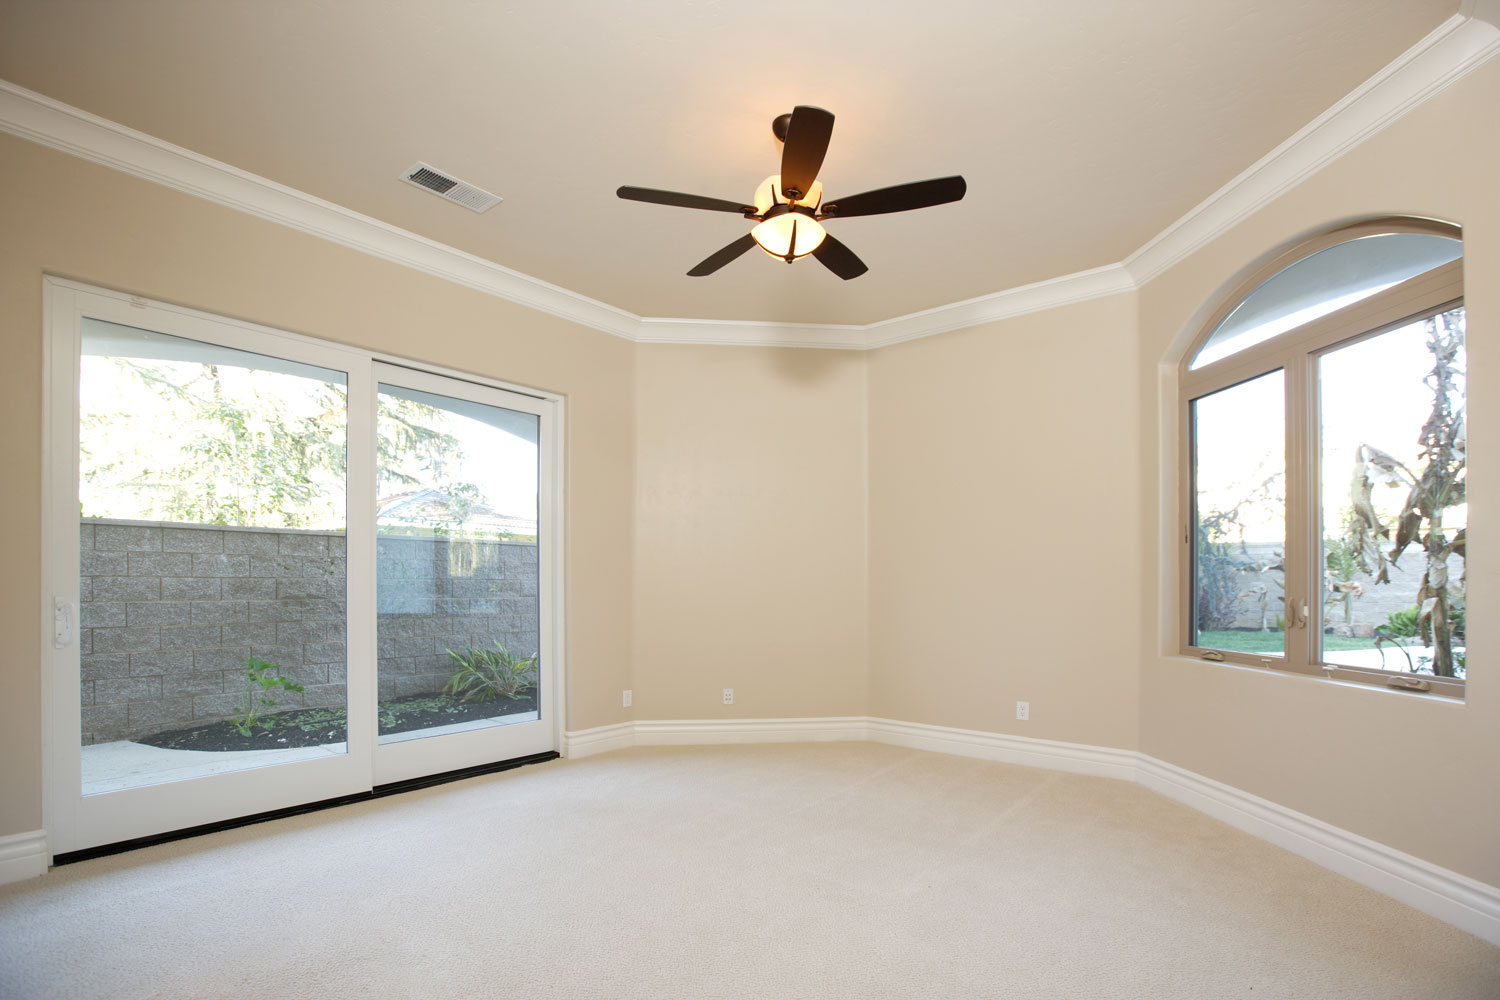 Empty room with tan walls, white trims, sliding doors and windows with a ceiling fan